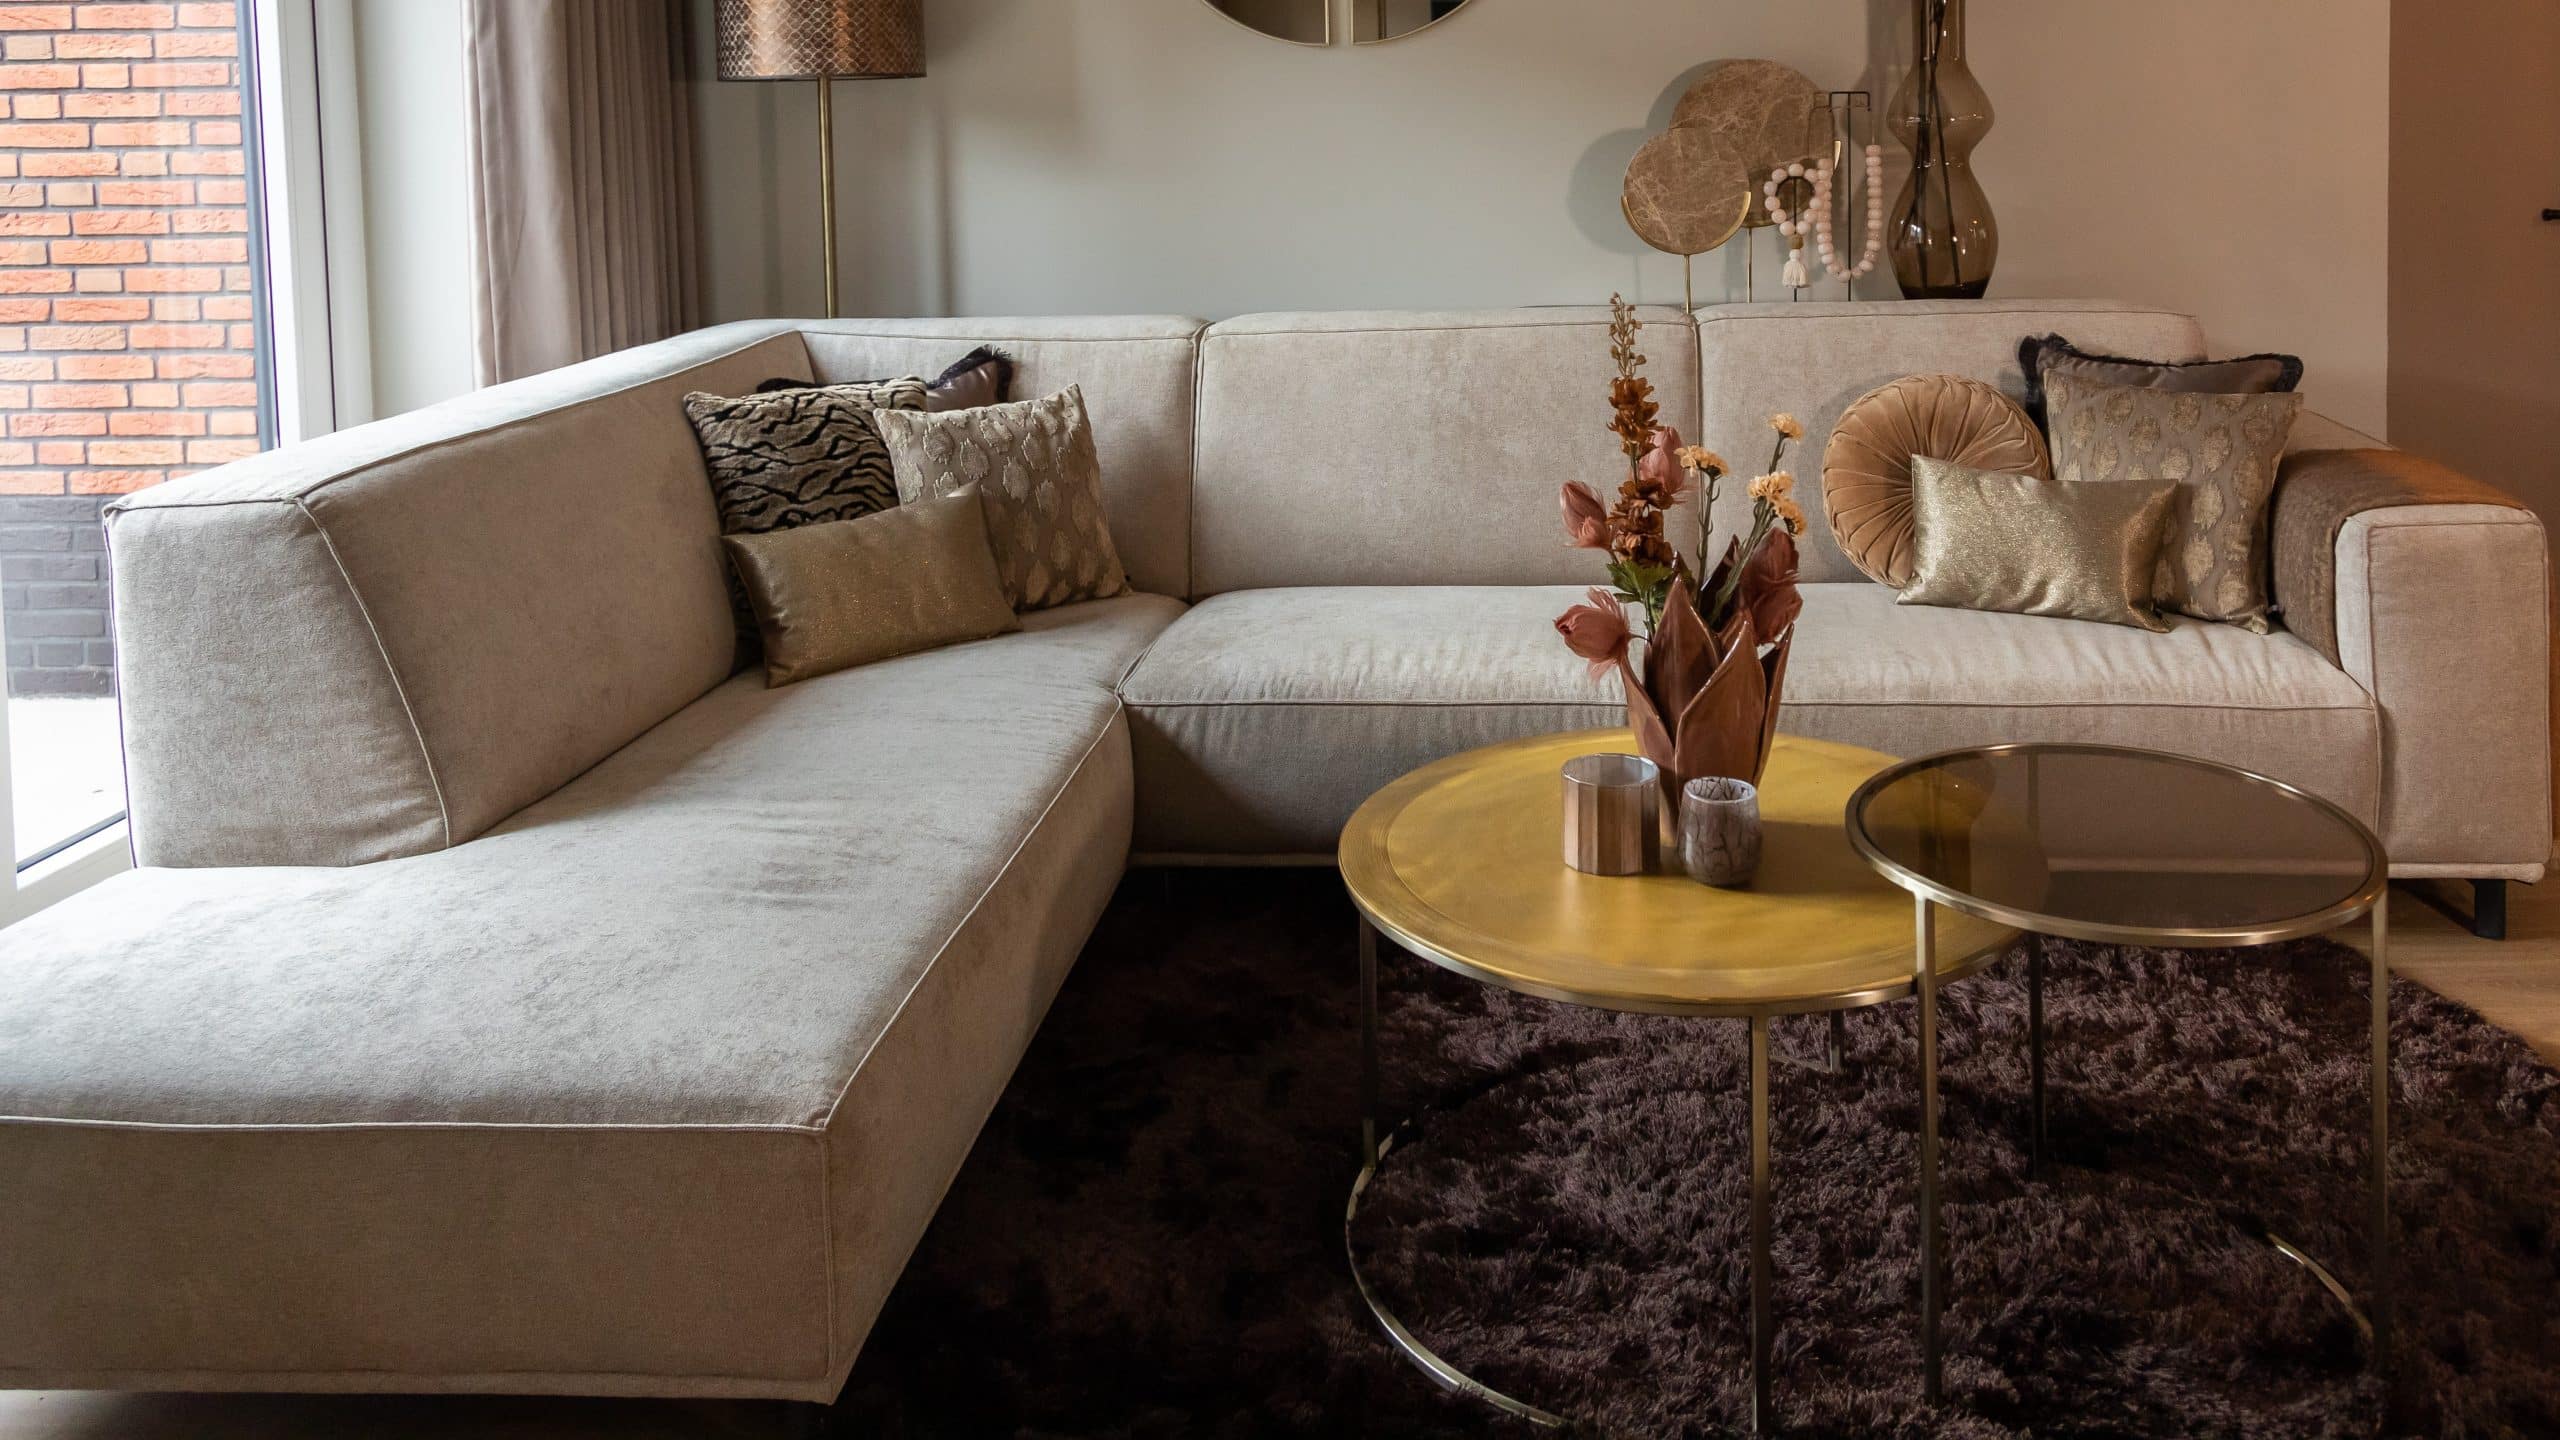 Inside view with corner sofa Sophie in a beige fabric and with a round rug.